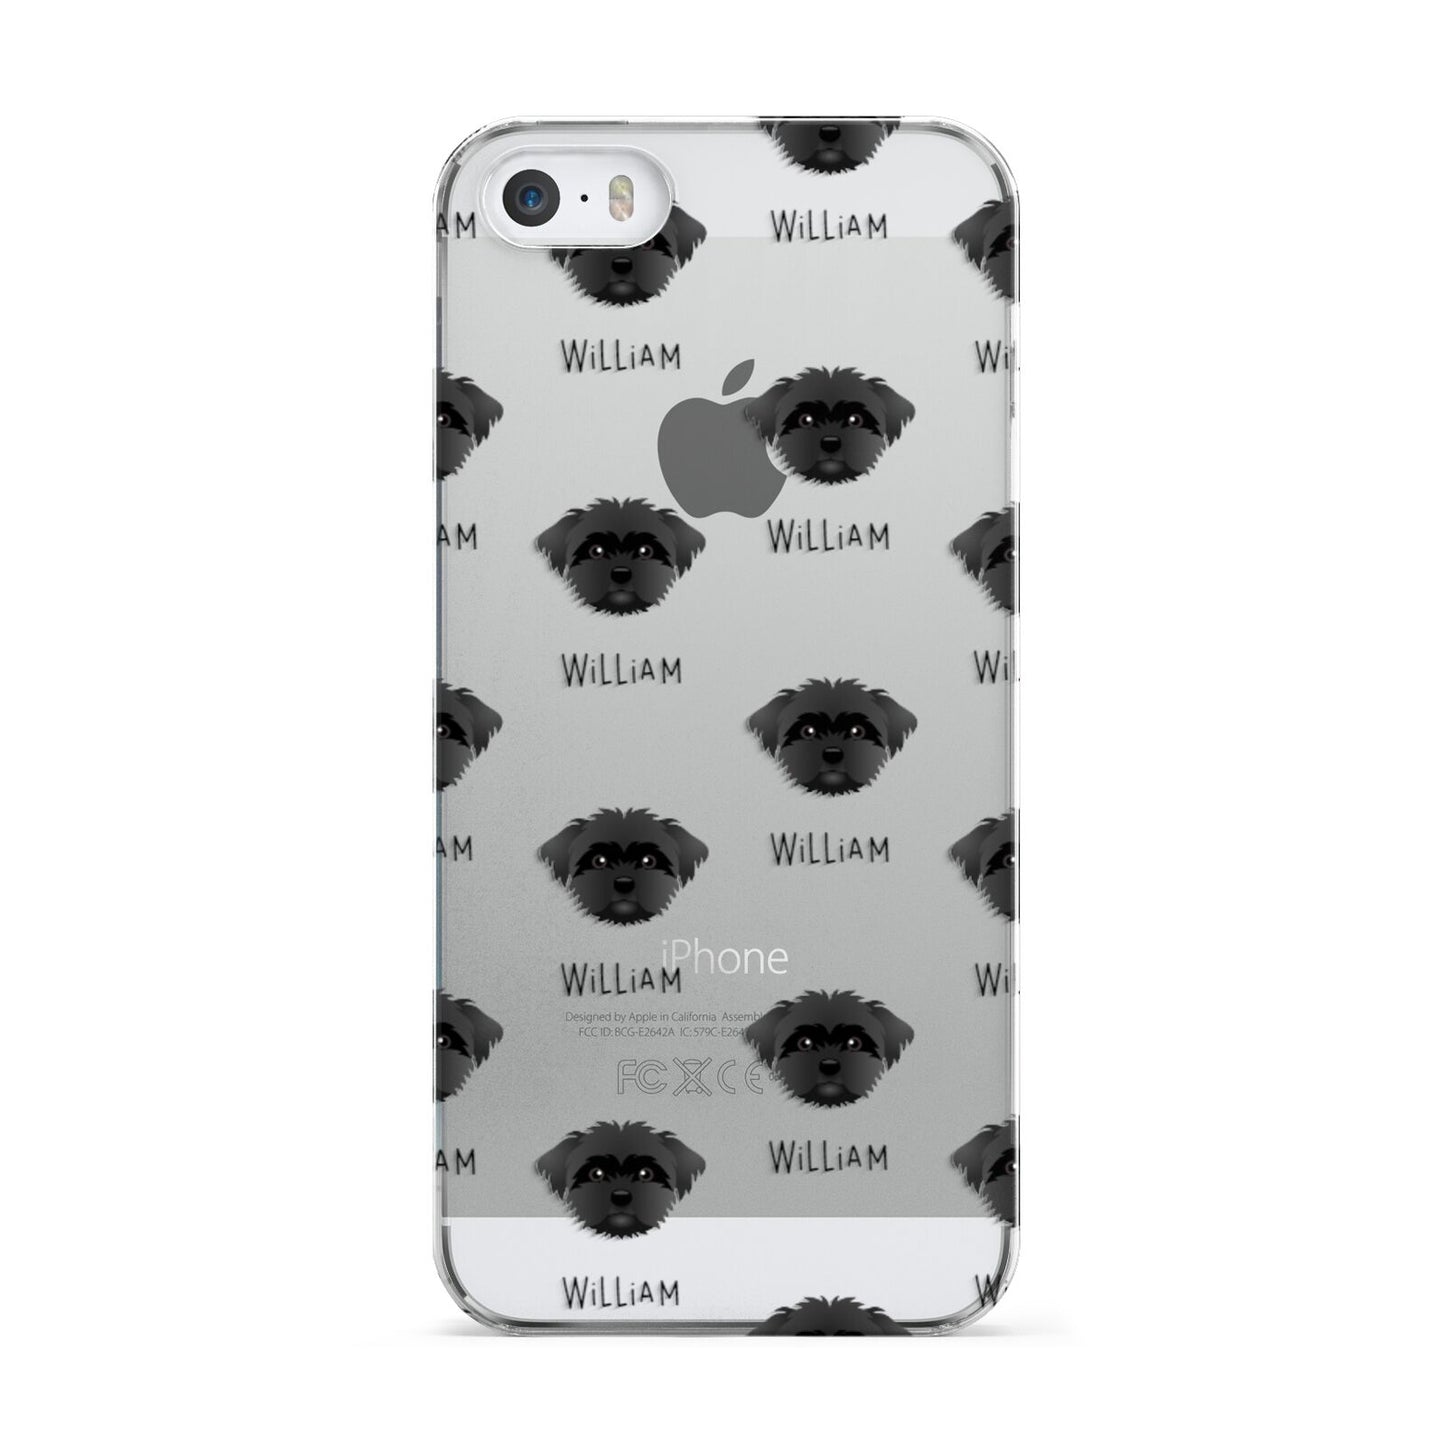 Peek a poo Icon with Name Apple iPhone 5 Case